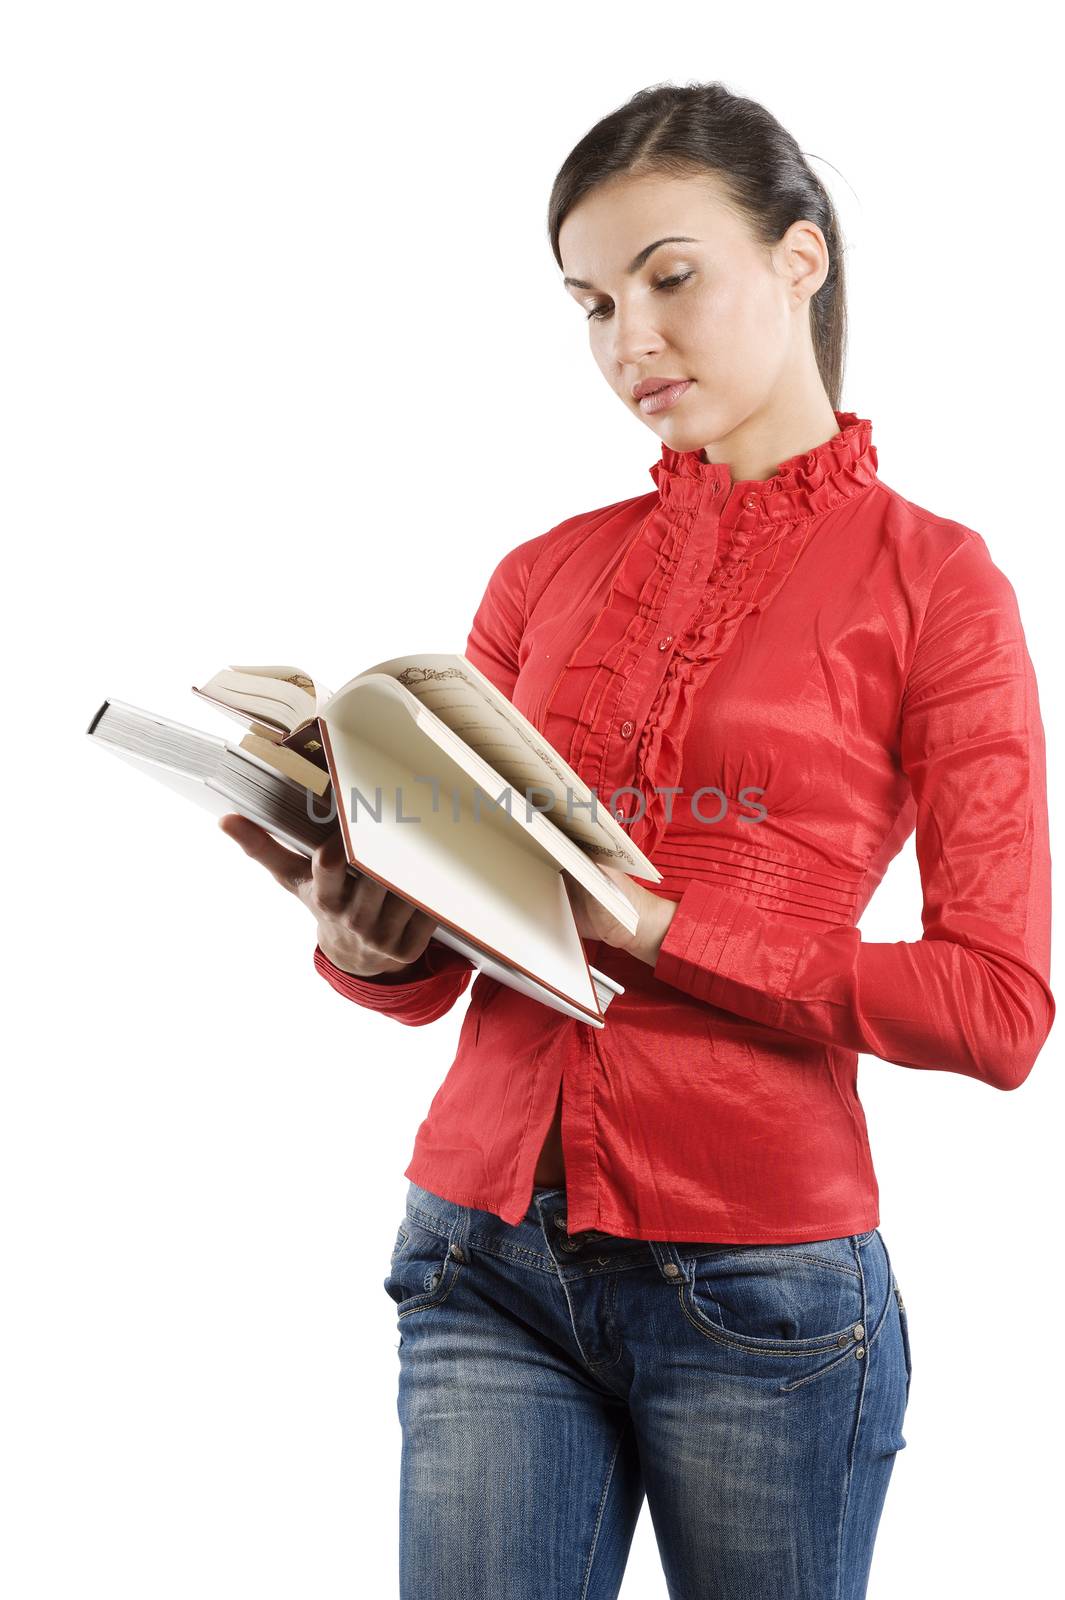 graceful student in red shirt reading a book isolated over white